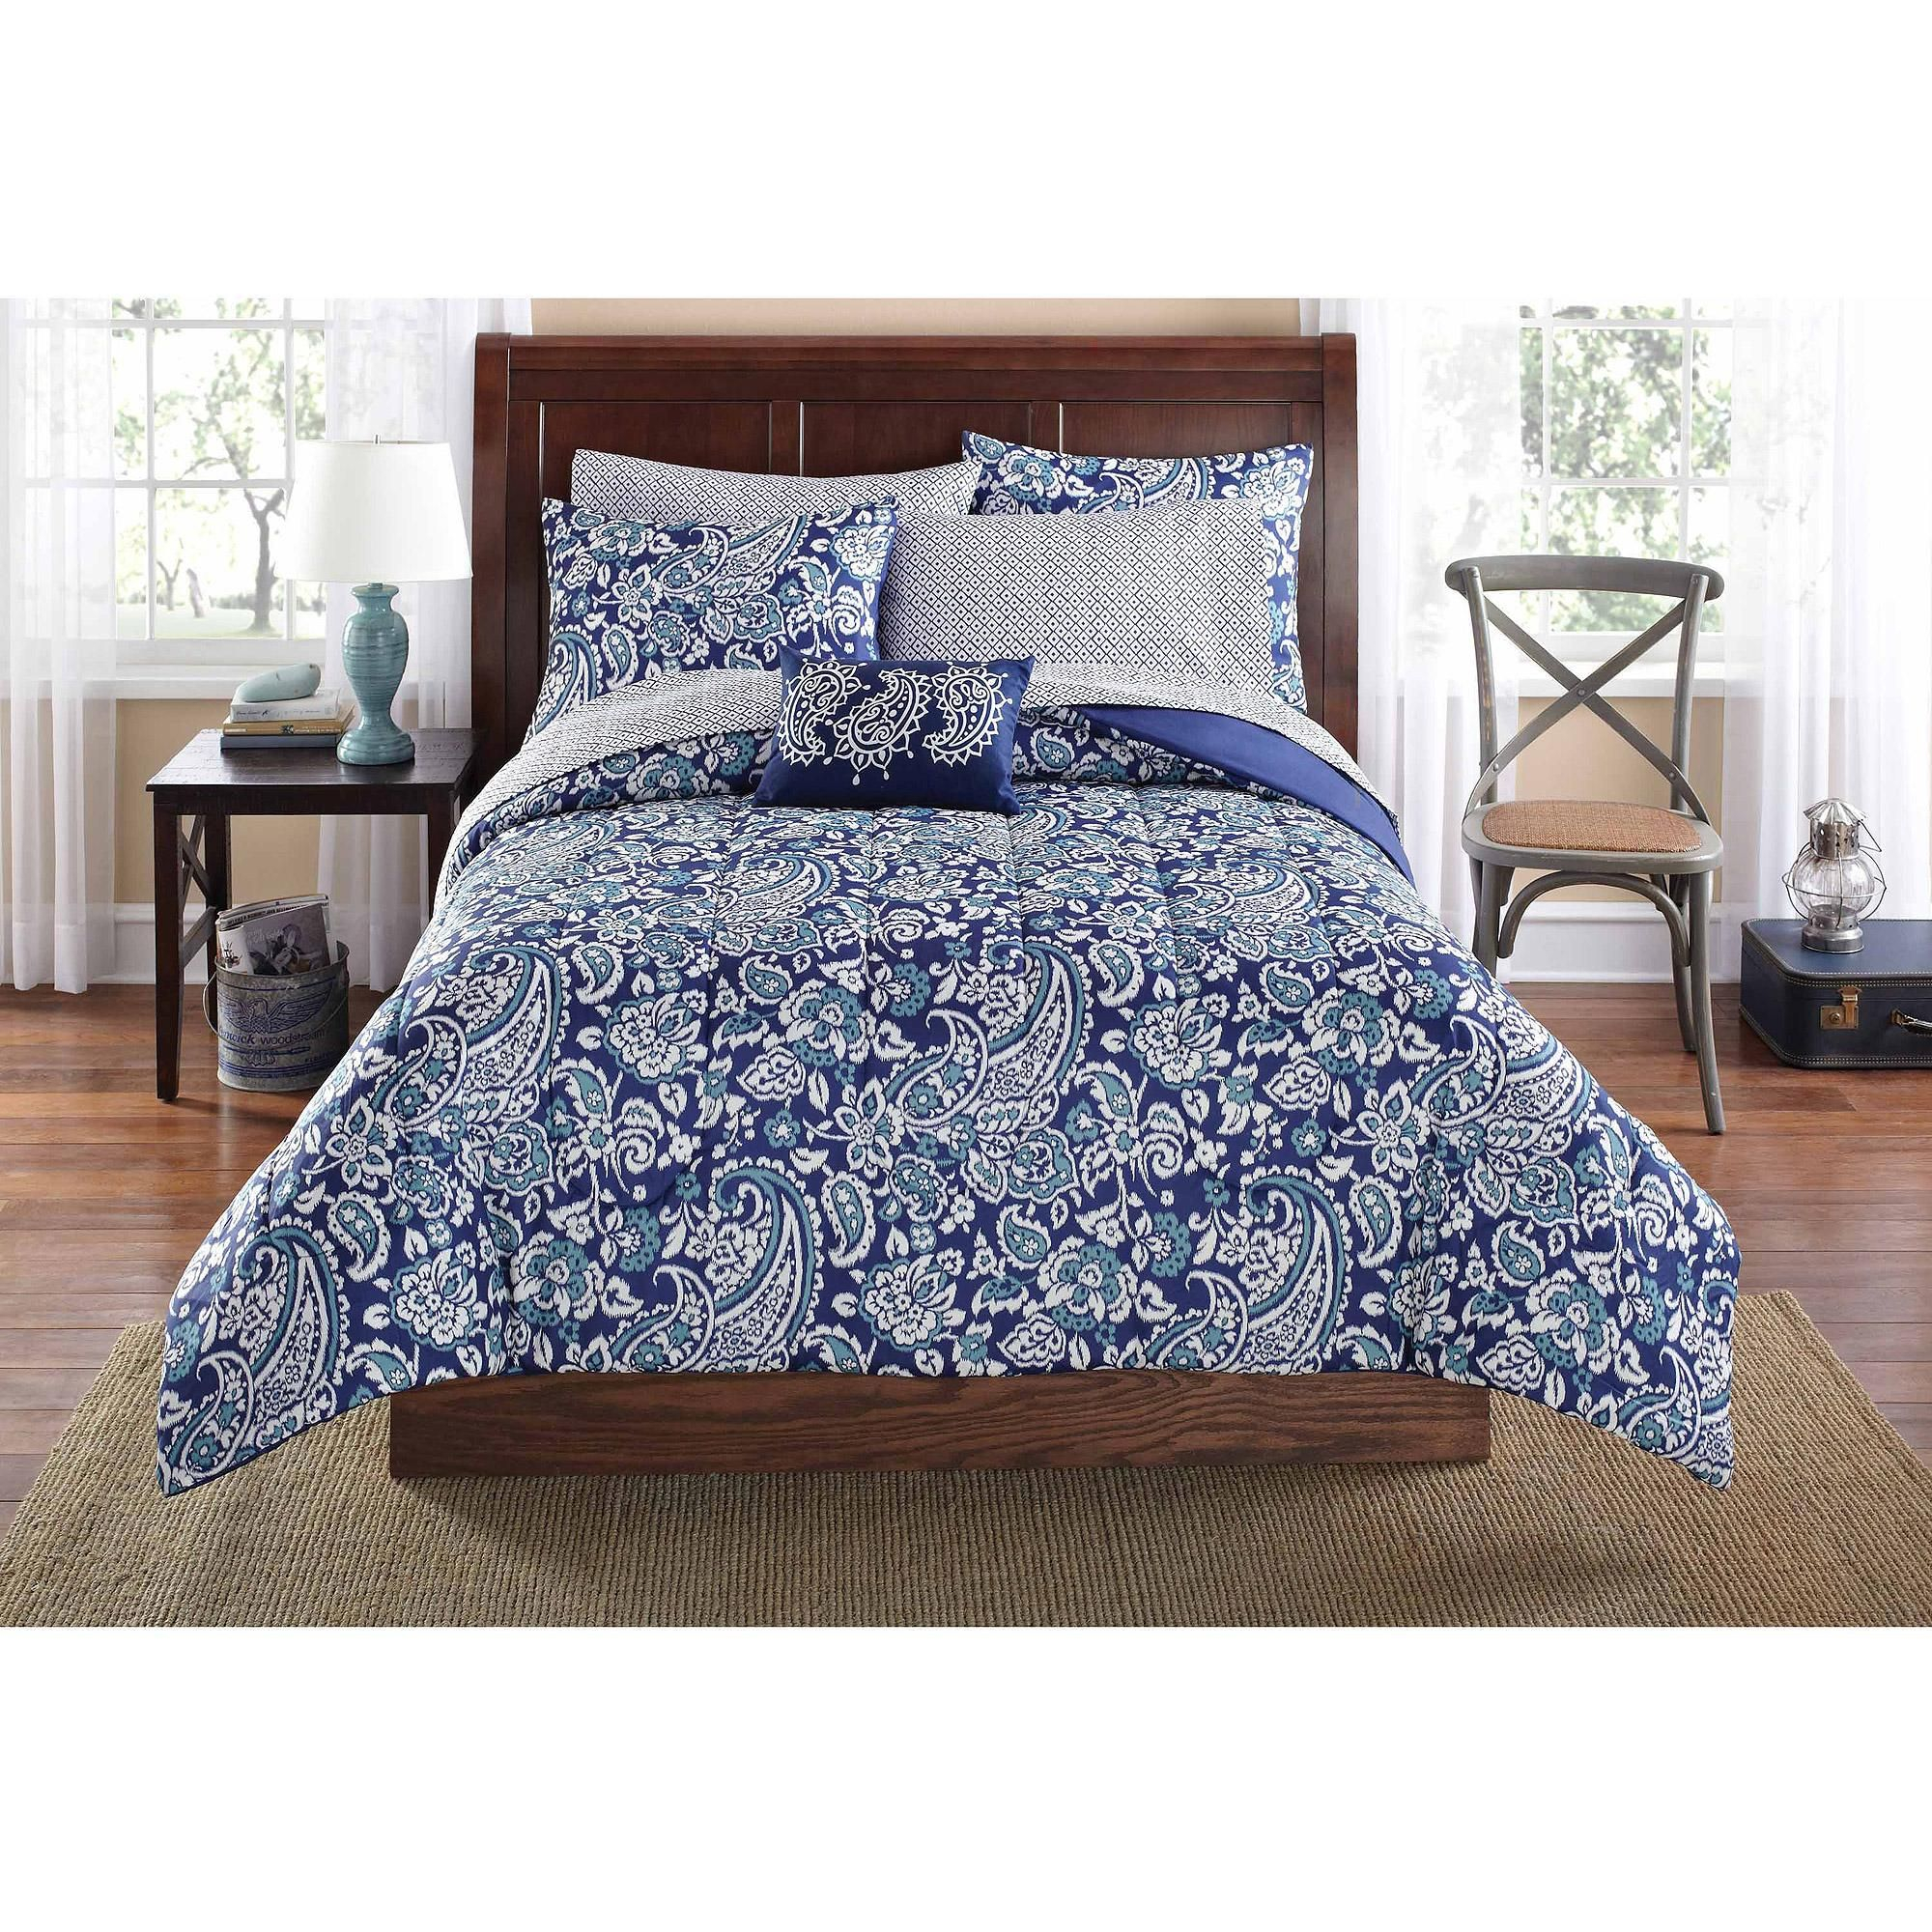 Mainstays Jaipur Paisley Bed In A Bag Set Blue Walmart I within proportions 2000 X 2000